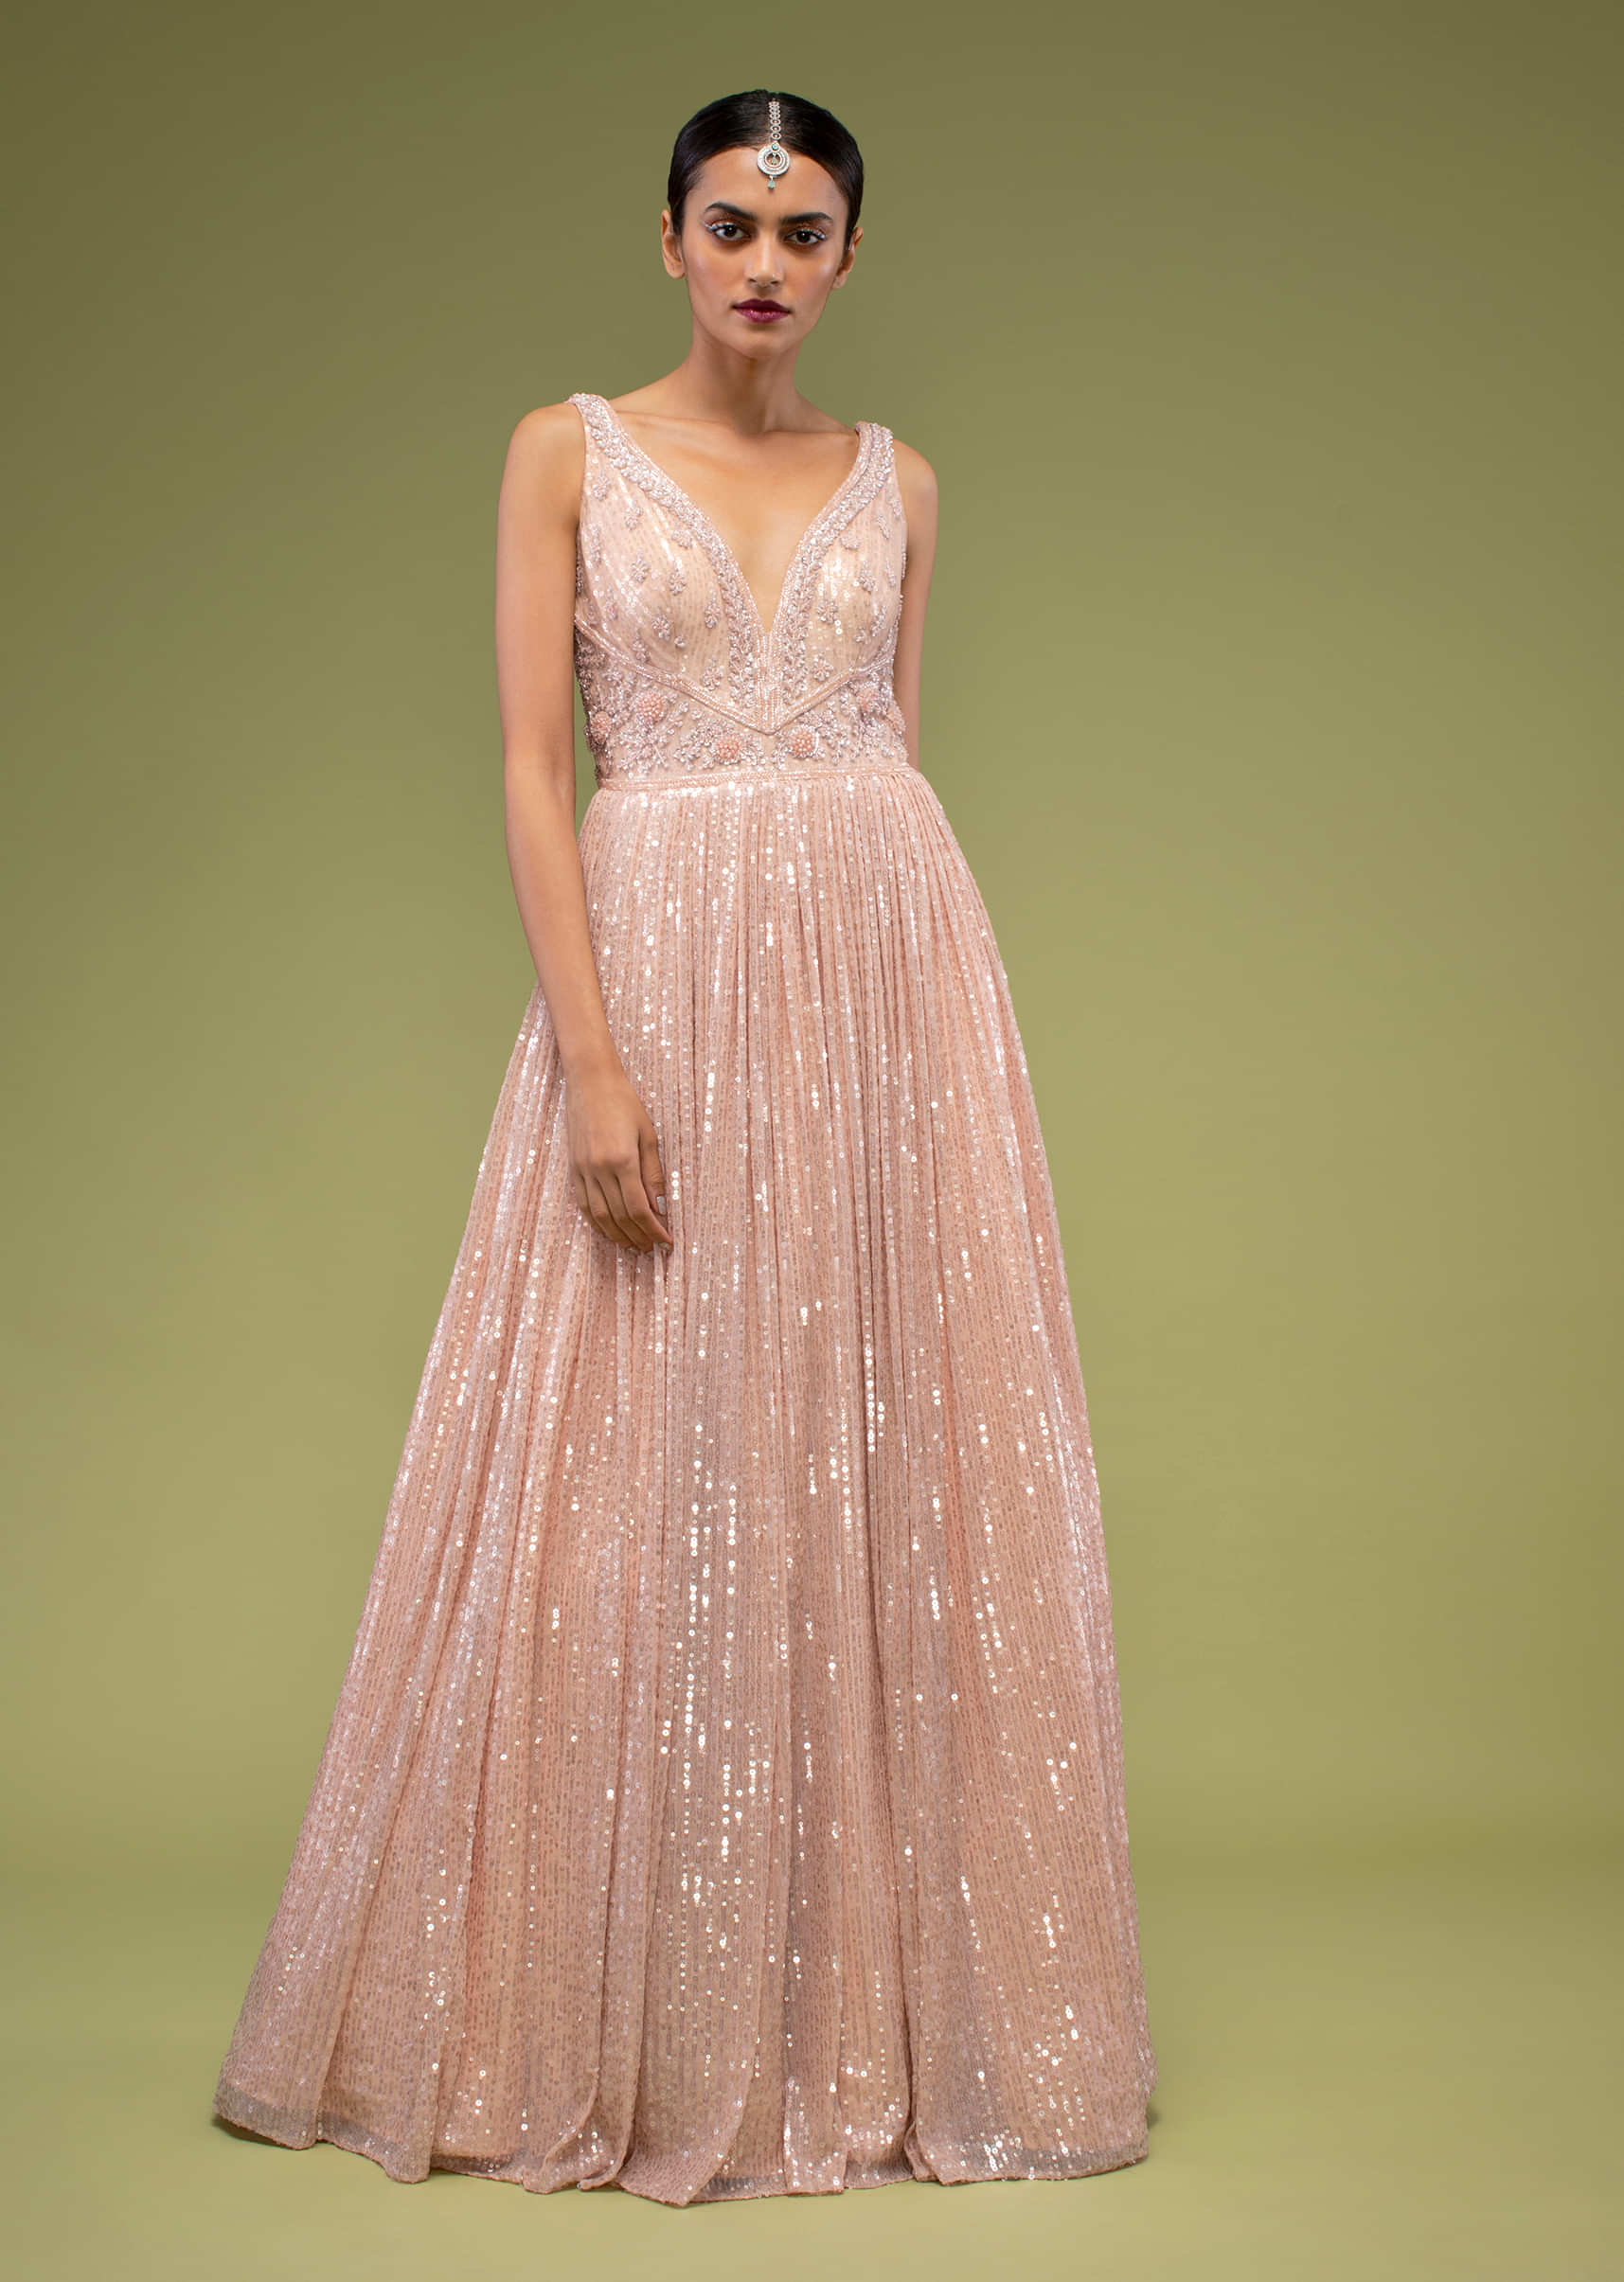 Peach Blush Gown In Sleeveless With Sequins Embroidery, Comes In A Sweetheart Neckline With Floral Embroidered Buttis